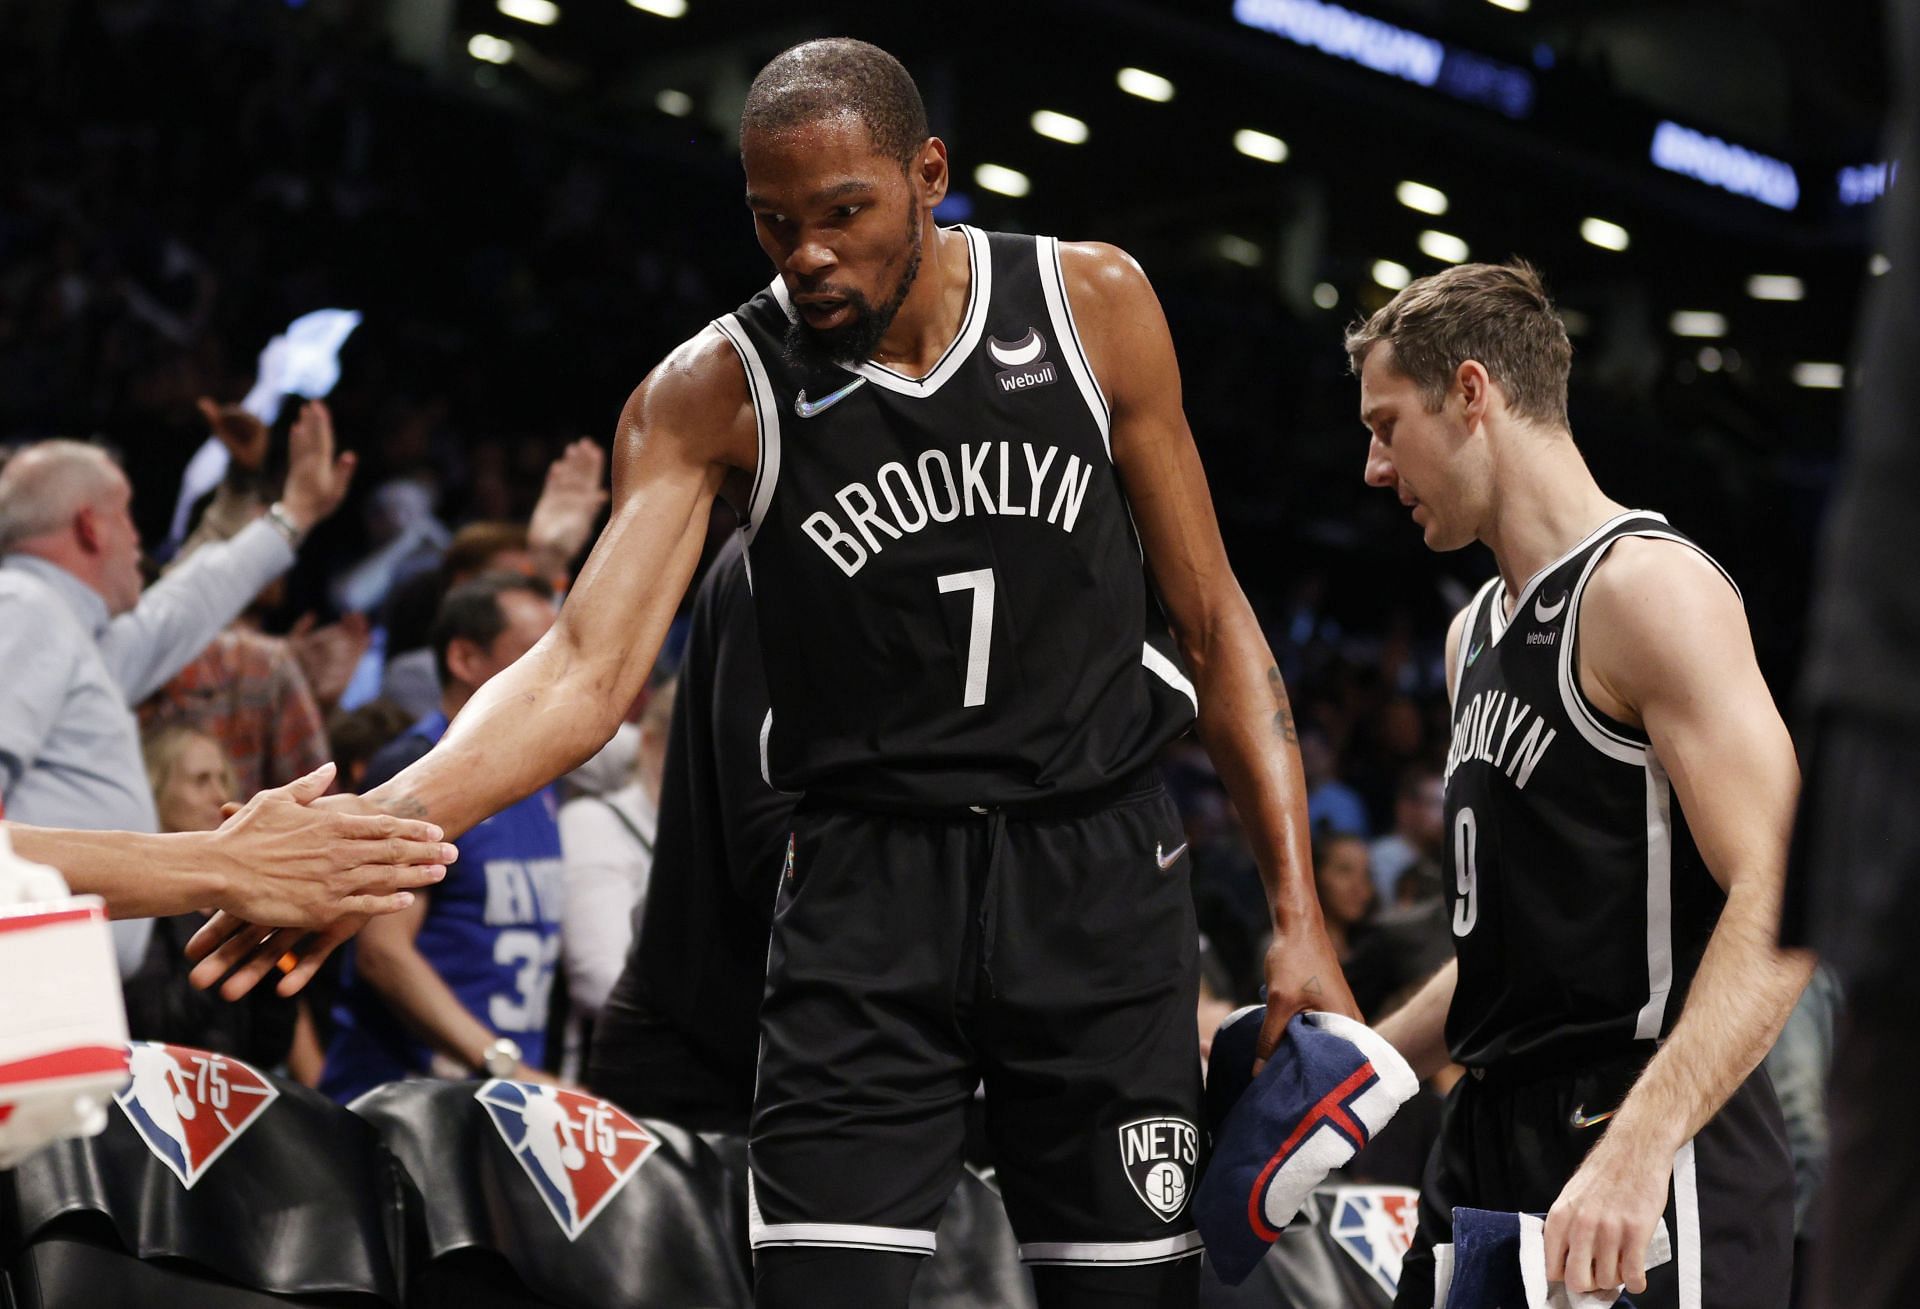 Kevin Durant of the Brooklyn Nets interacts with a teammate during the first half of the Eastern Conference play-in game against the Cleveland Cavaliers on Wednesday in the Brooklyn borough of New York City.